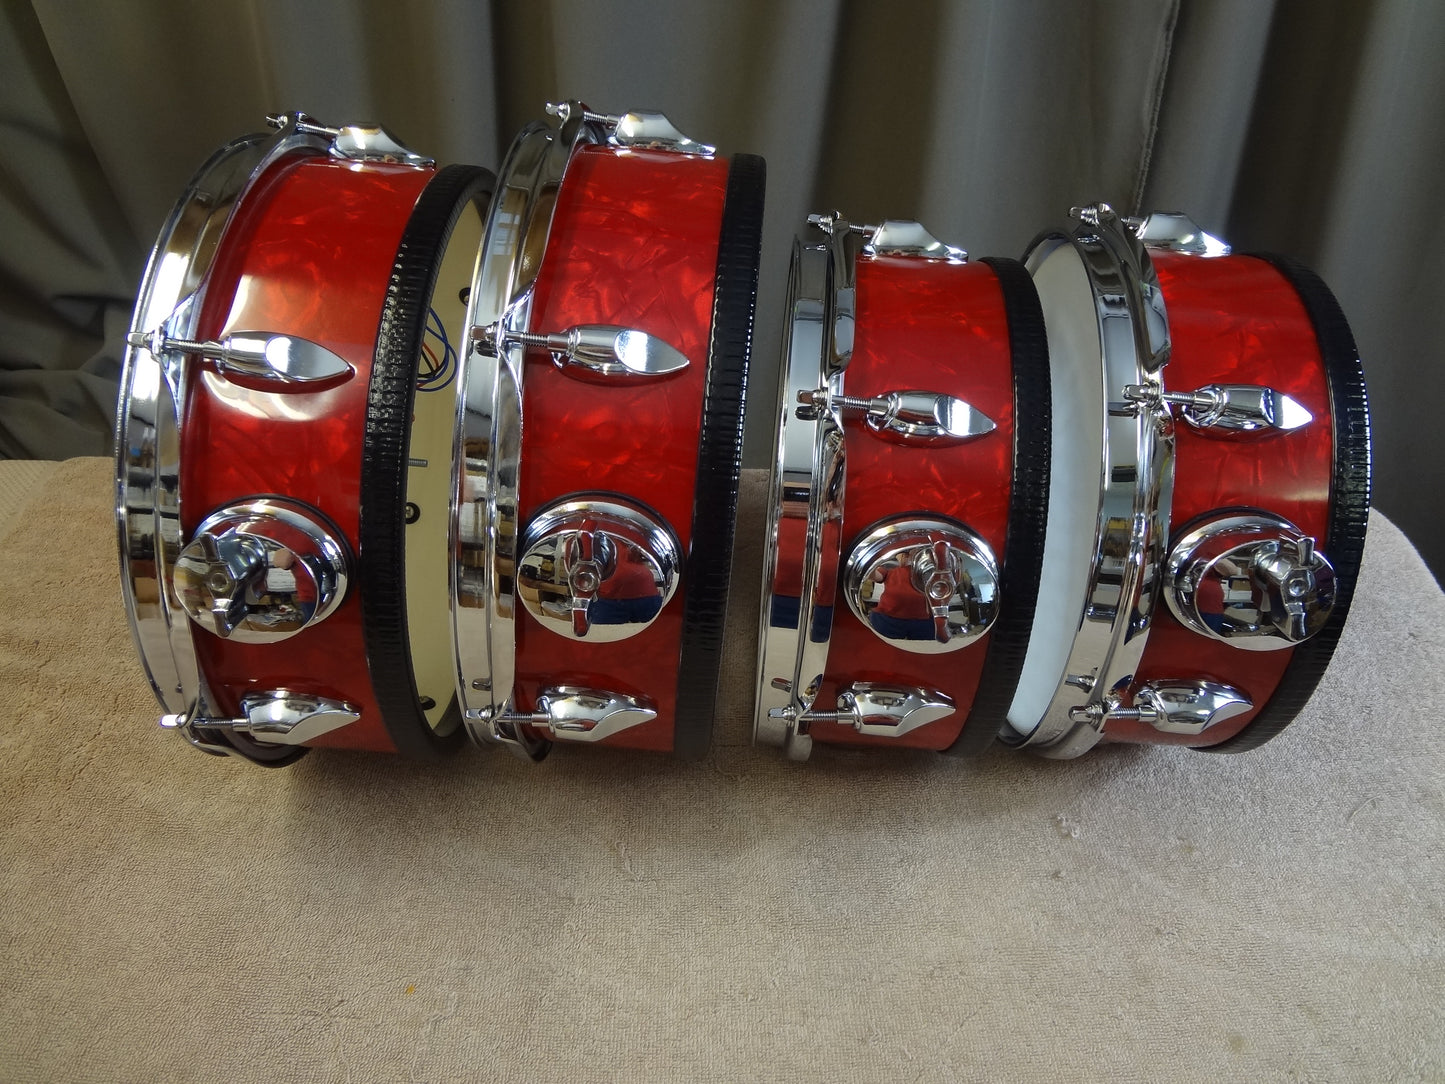 NEW 4 PIECE ELECTRONIC DRUM SHELL PACK - RED PEARL